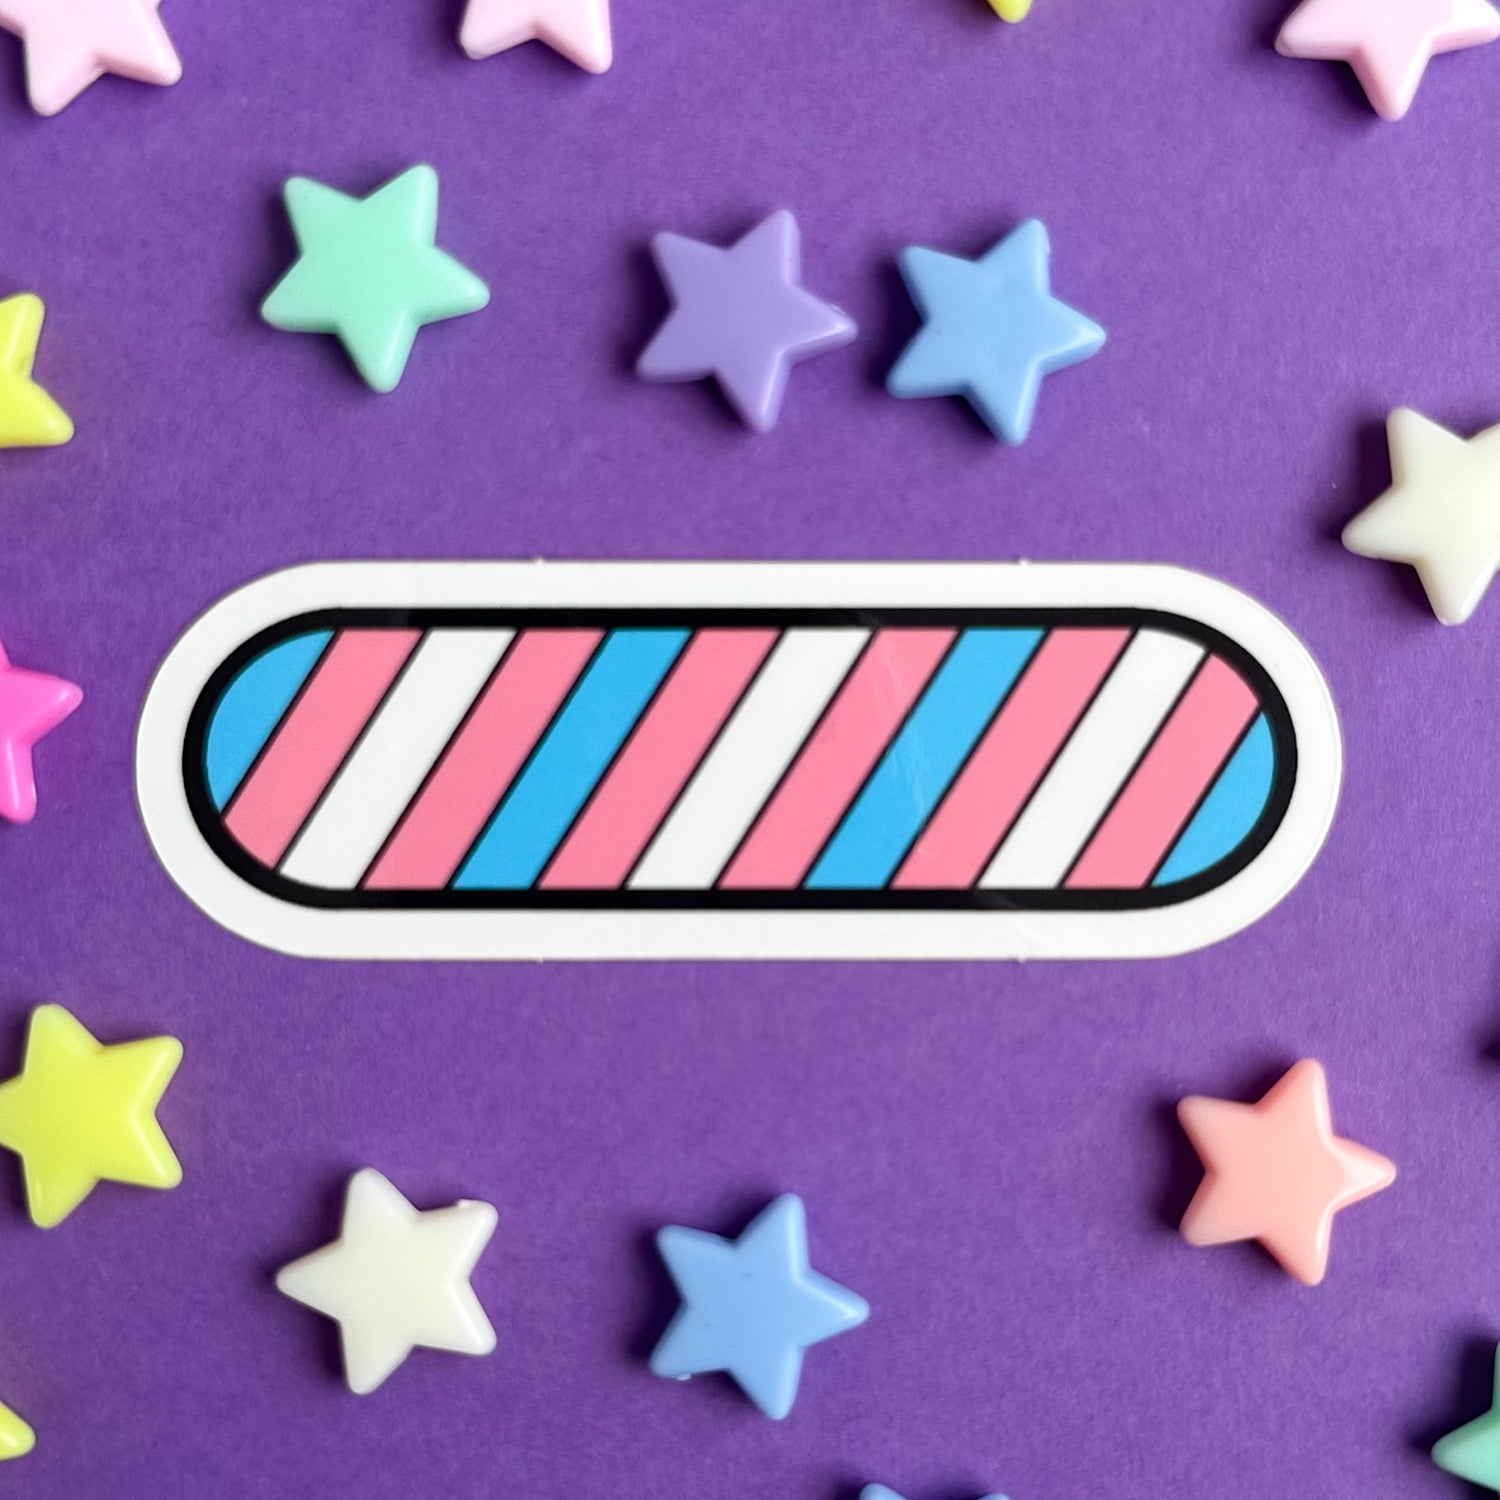 An oval shaped sticker with diagonal stripes of blue, pink, and white across it, the colors of the Trans Pride flag. The sticker is on a purple background with star beads around it. 